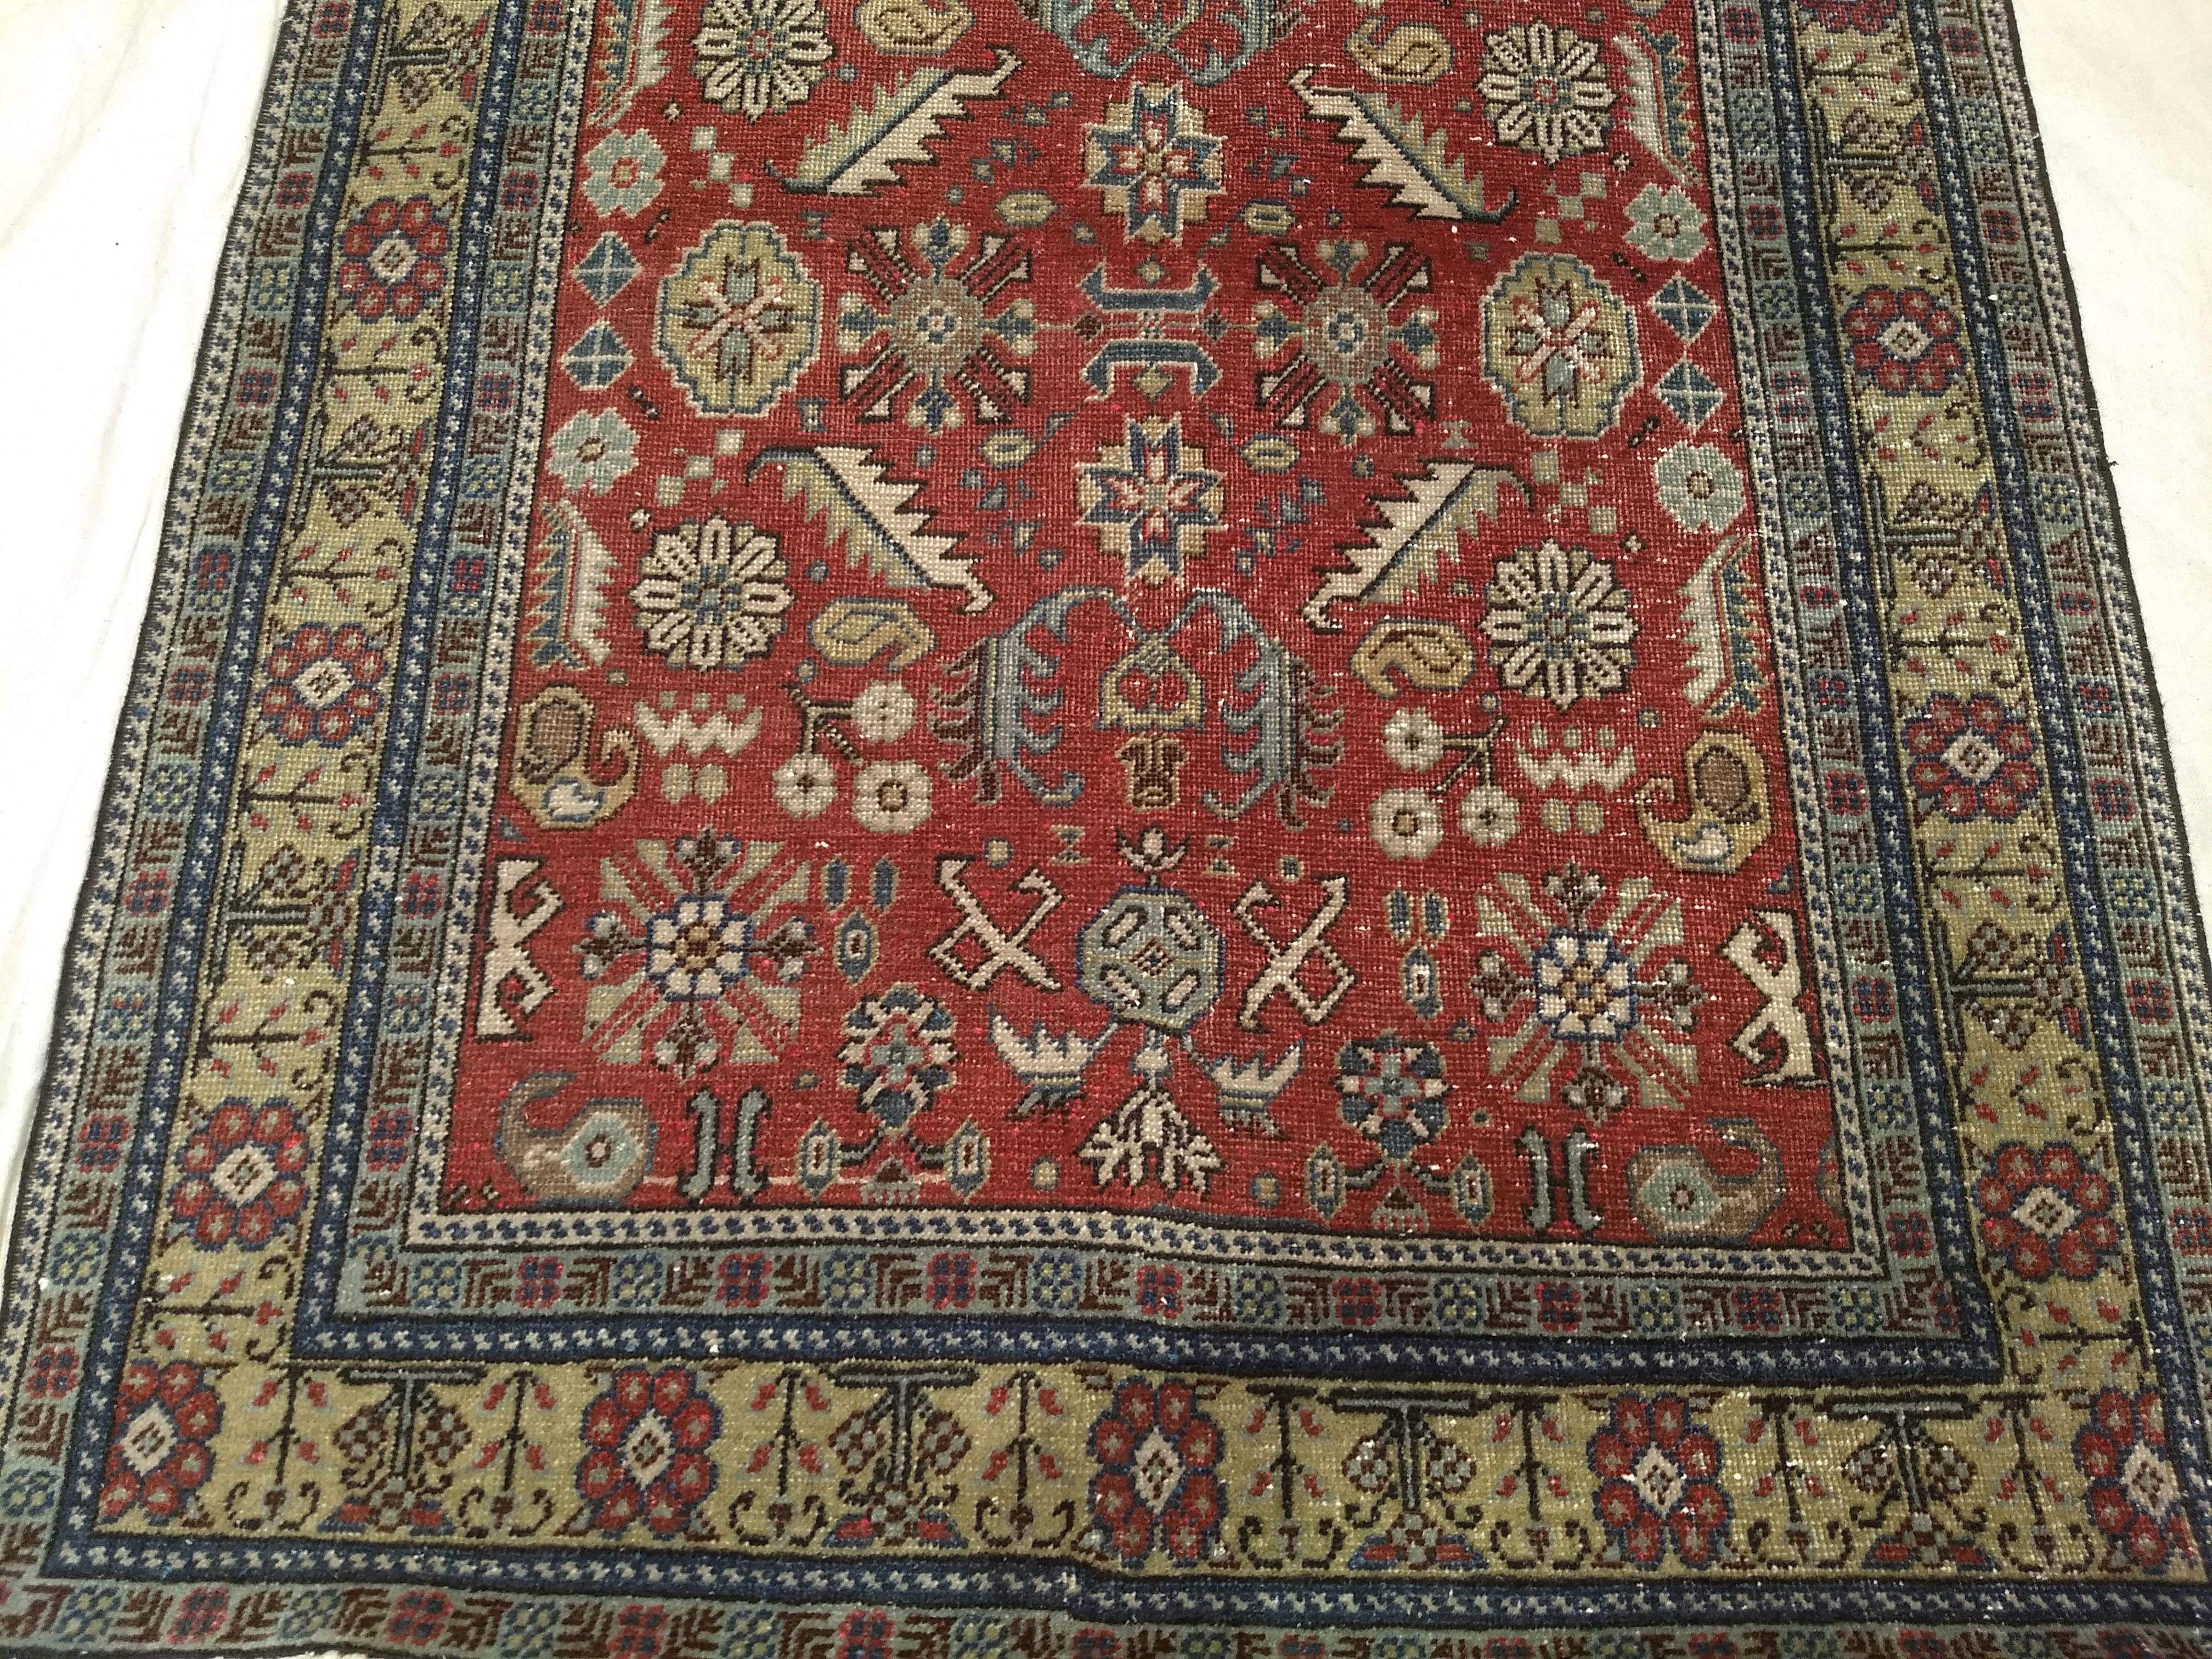 Vintage Khotan Area Rug in Allover Geometric Pattern on Brick Red, Yellow, Ivory For Sale 1